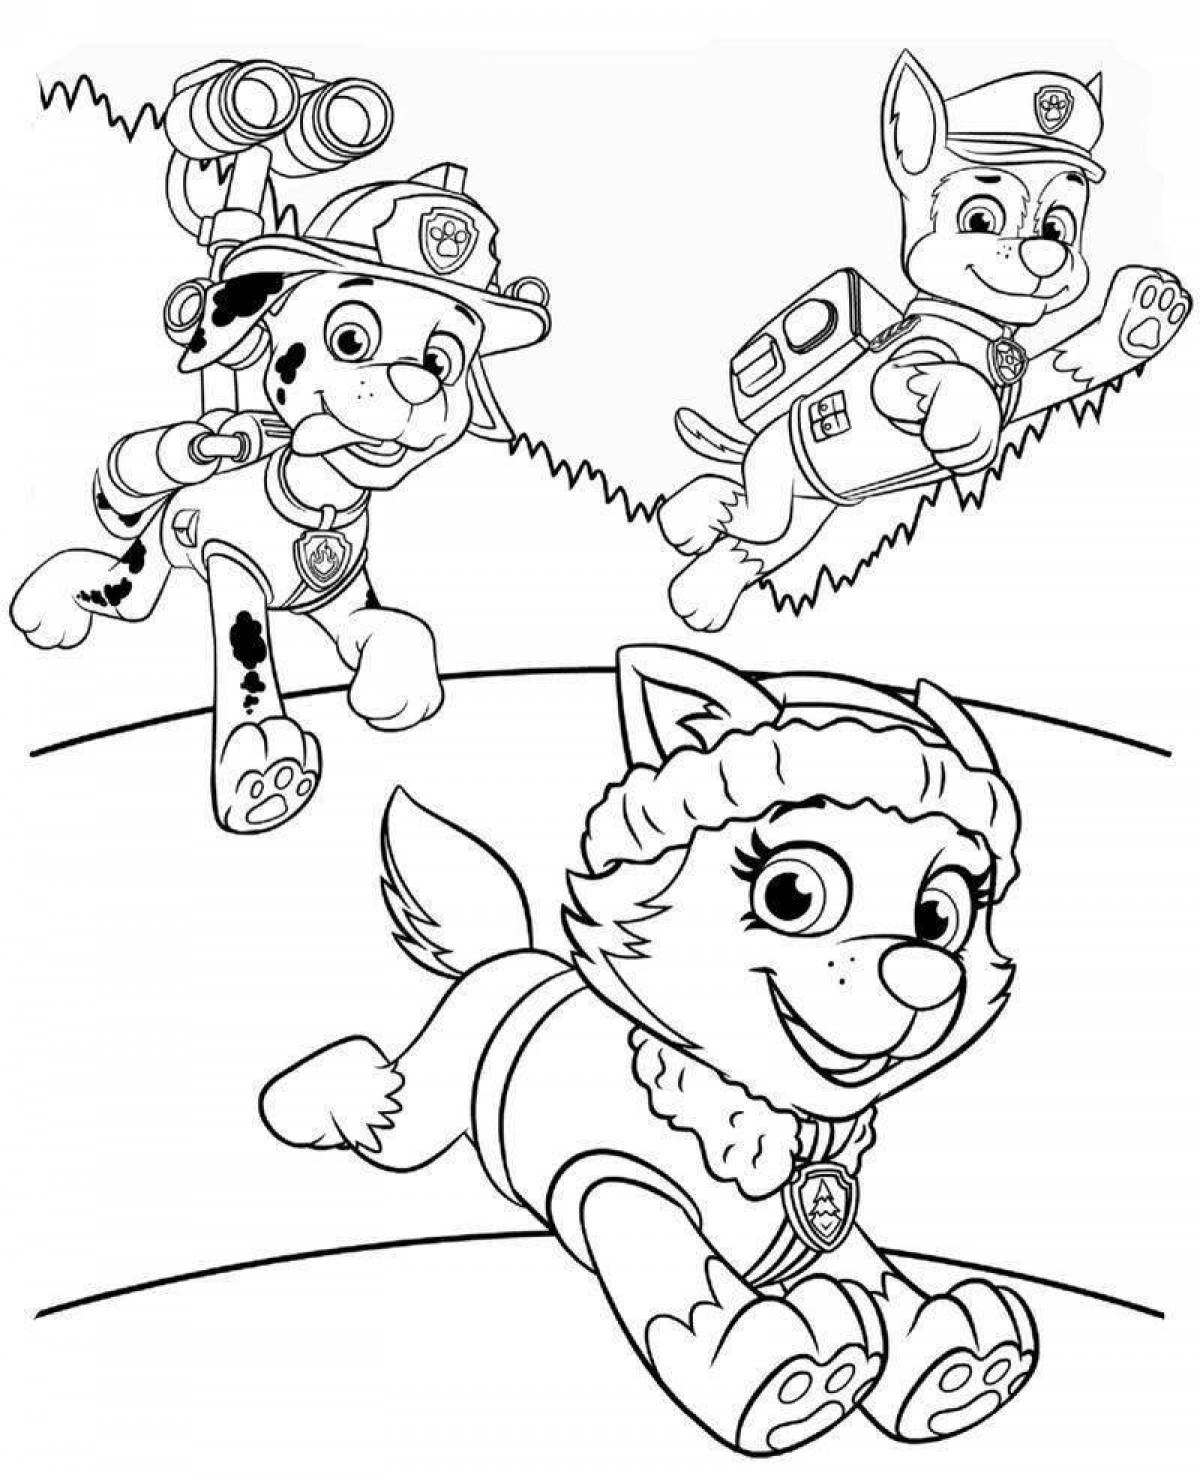 Funny coloring wild cat paw patrol